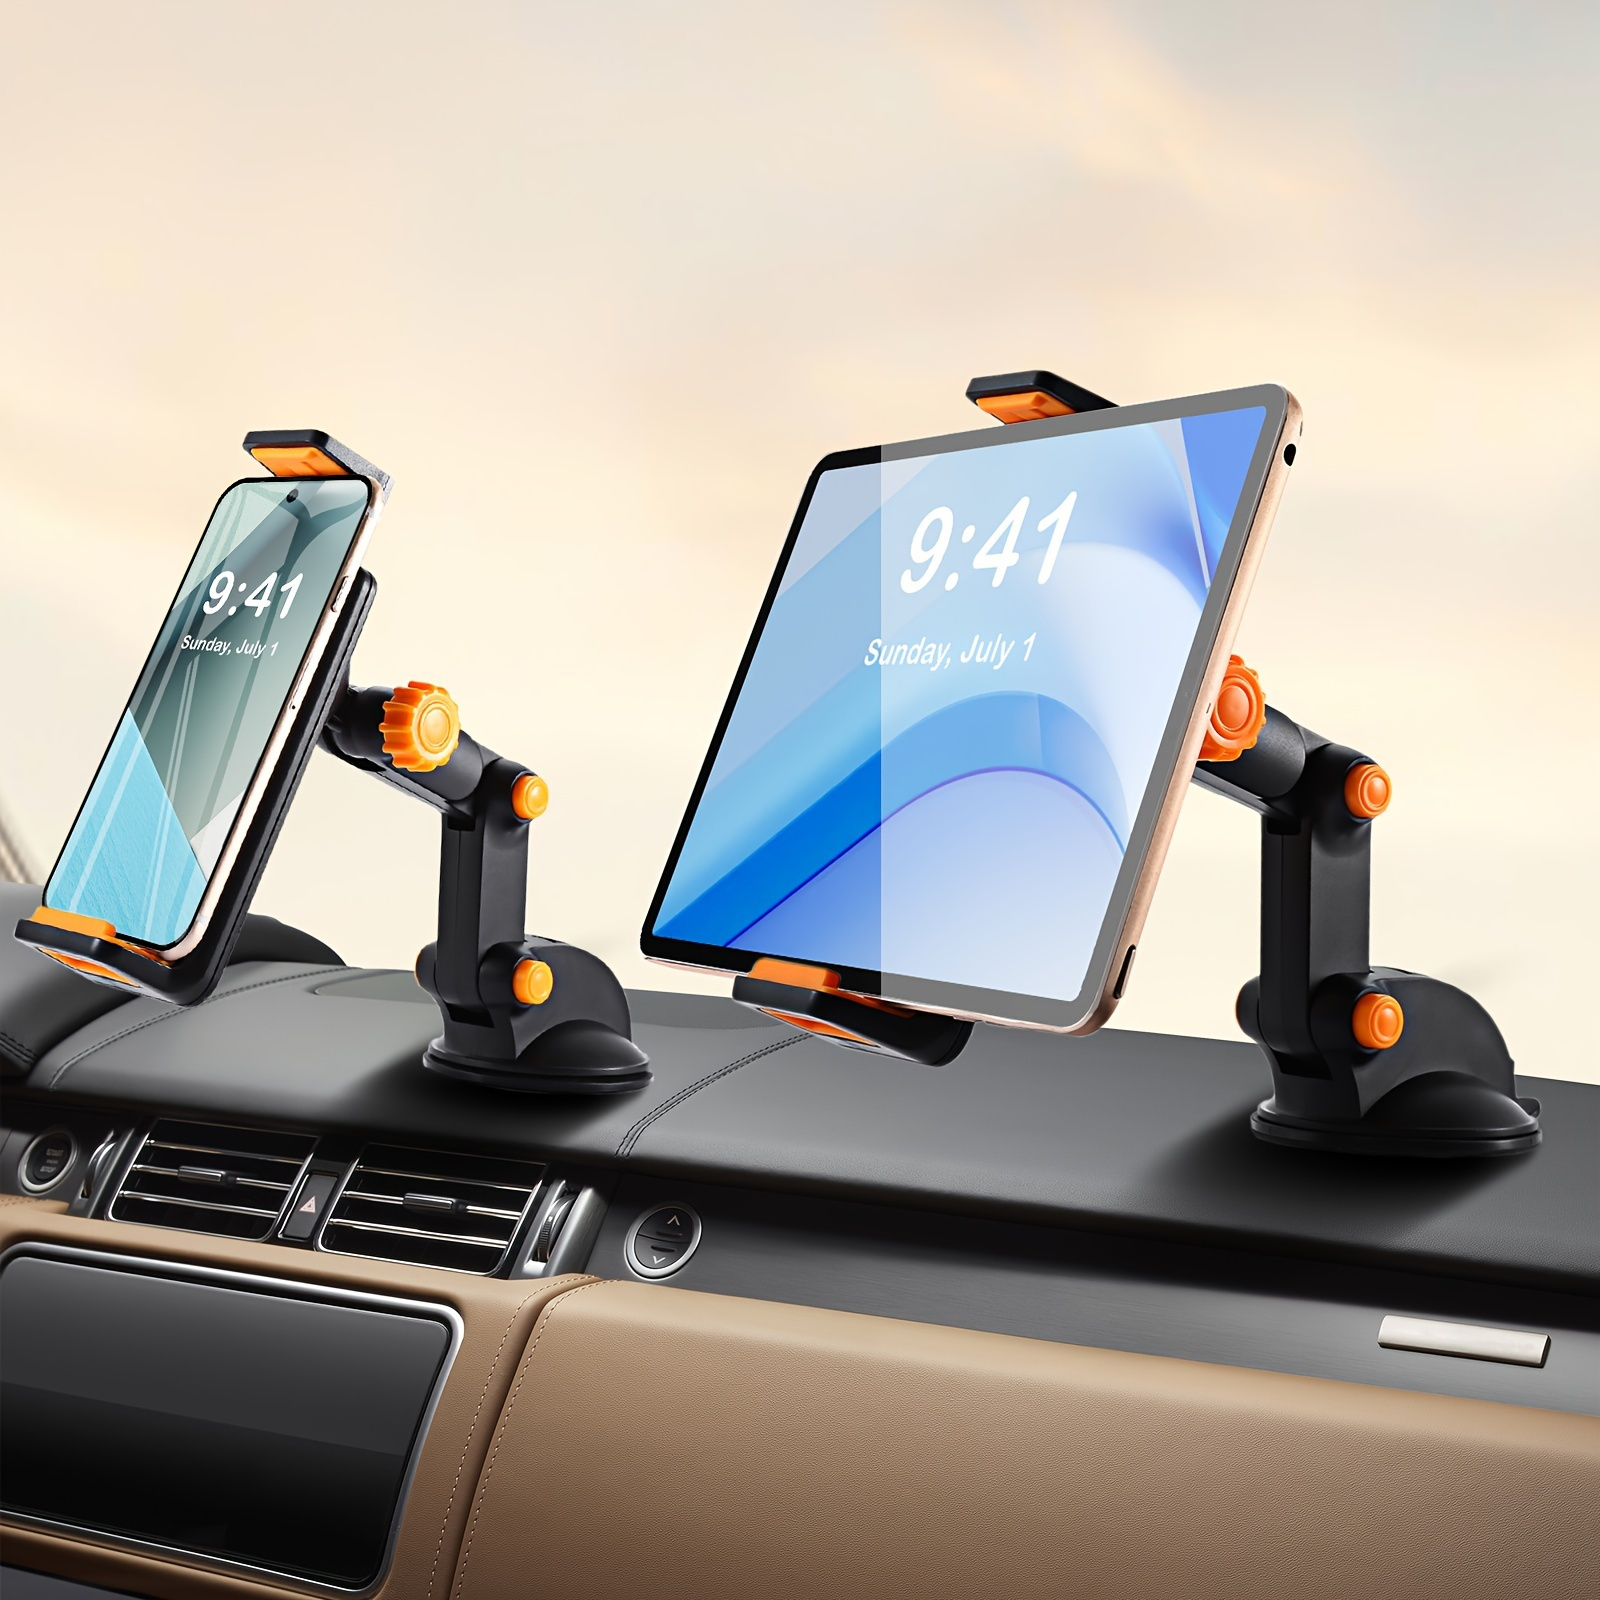 

Car Phone&tablet Holder Mount, Suction Cup Hands-free Car Cell Phone Holder For Dashboard, Compatible With 4-12 Inch Tablets&cellphones.